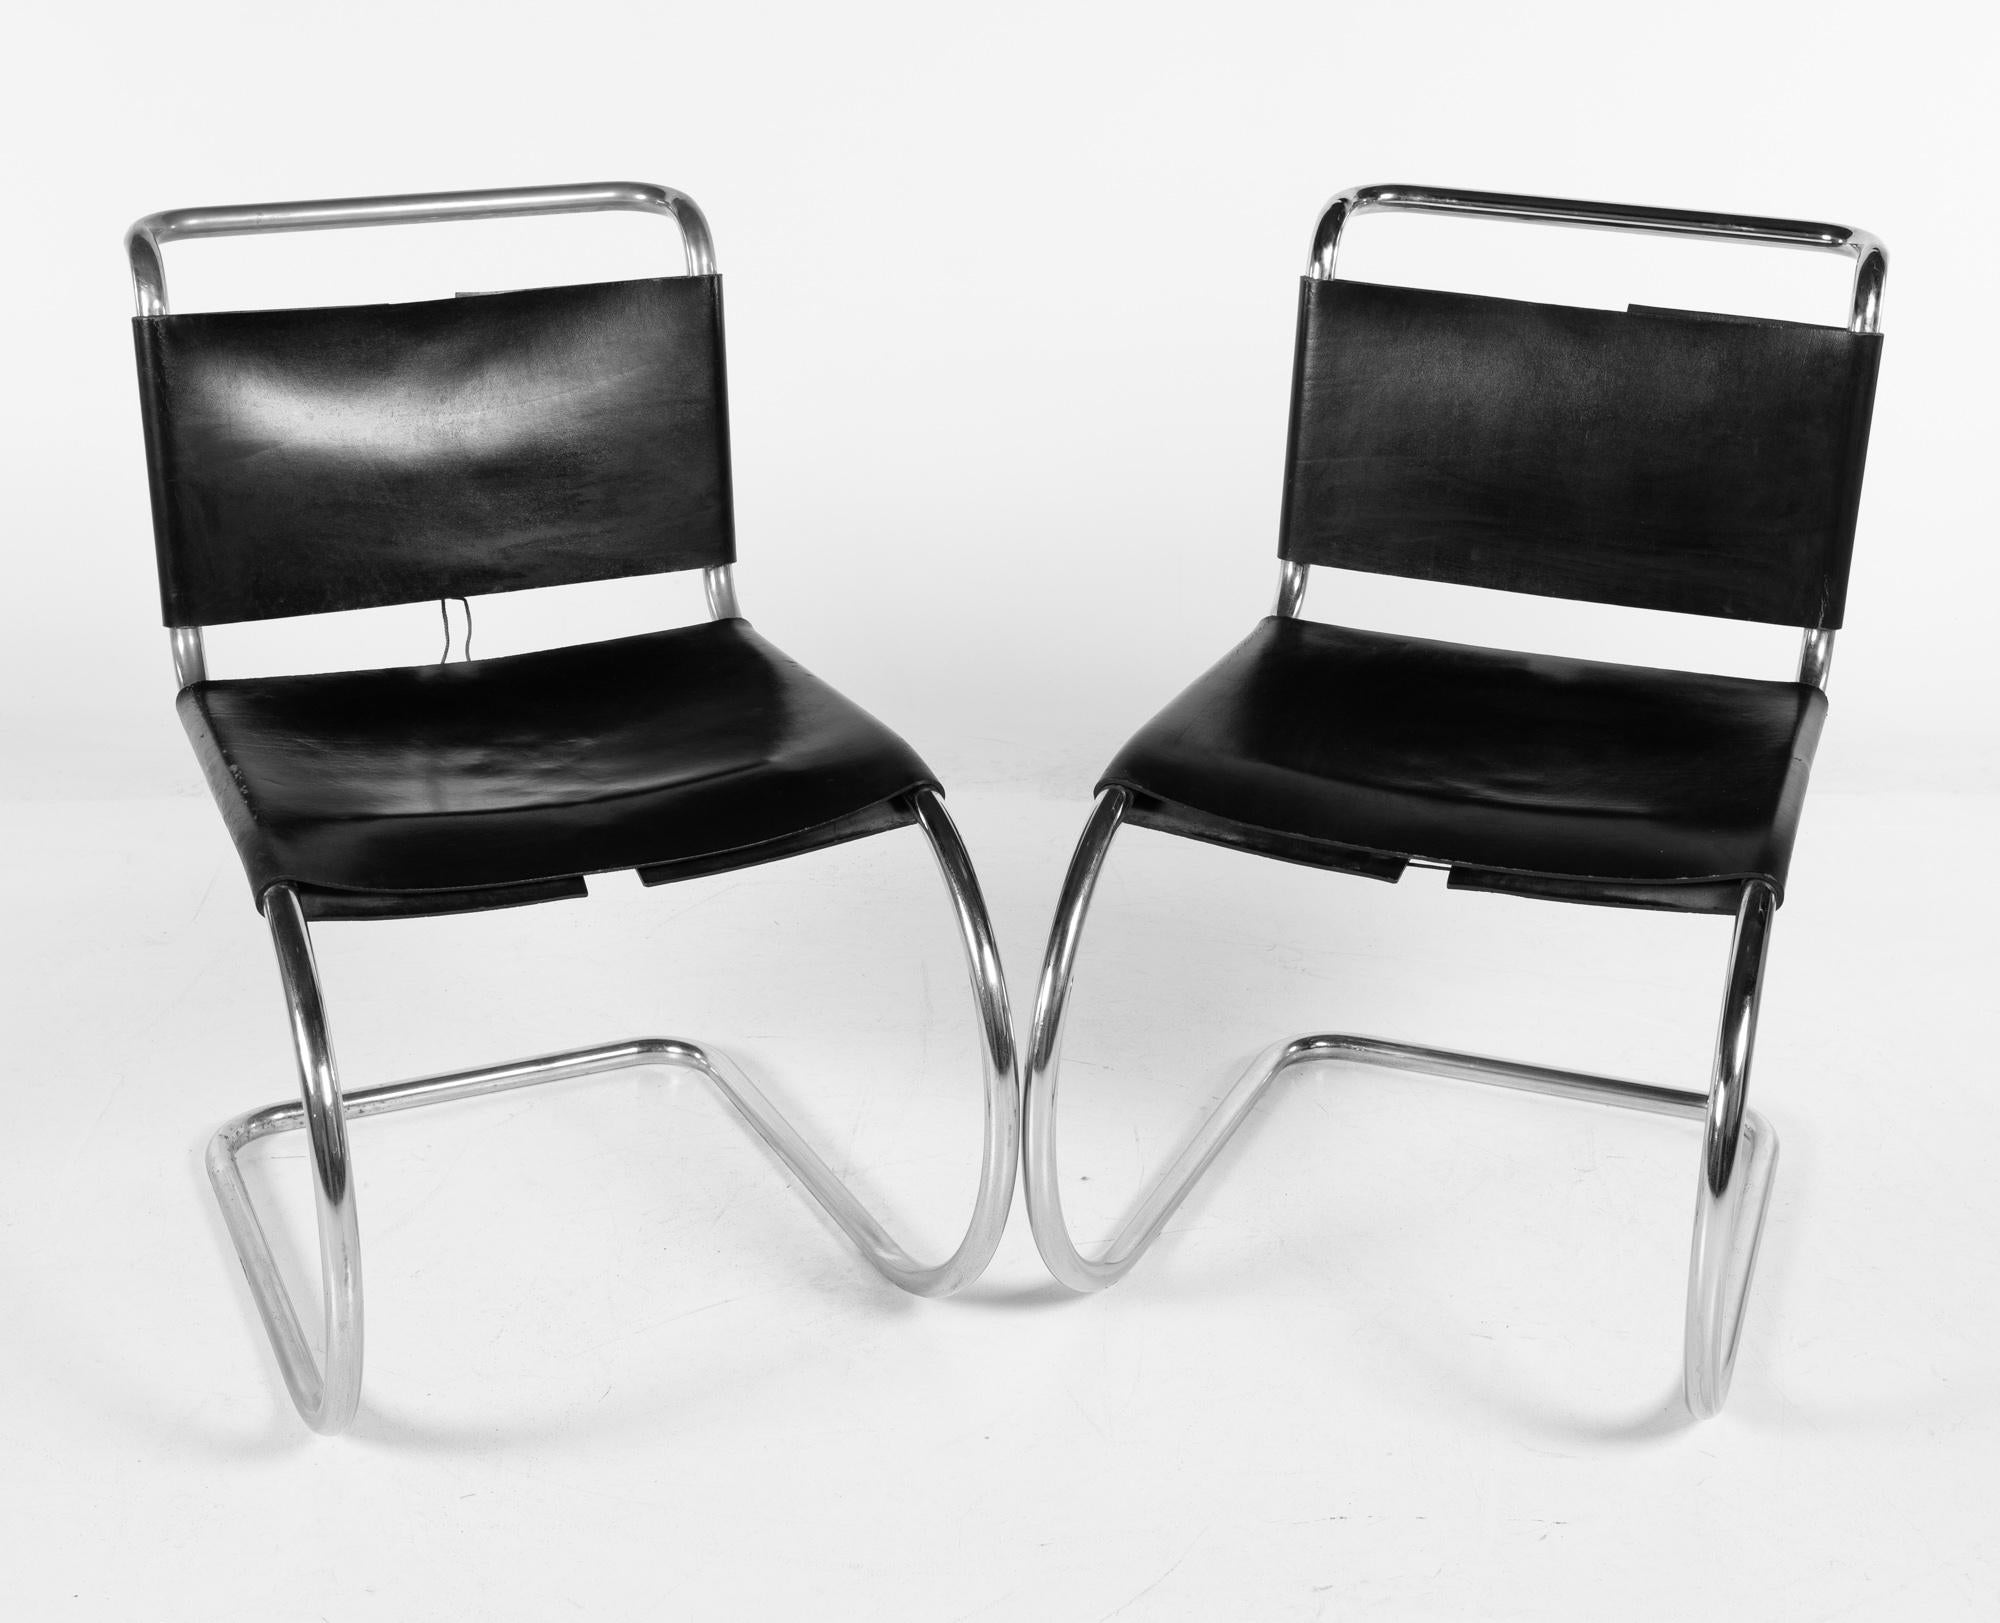 Mart Stam for Fasem Model S33 Mid Century Leather and Chrome Cantilever Chairs

Each chair measures: 19.5 wide x 27.5 deep x 31 high, with a seat height of 17.5 inches

All pieces of furniture can be had in what we call restored vintage